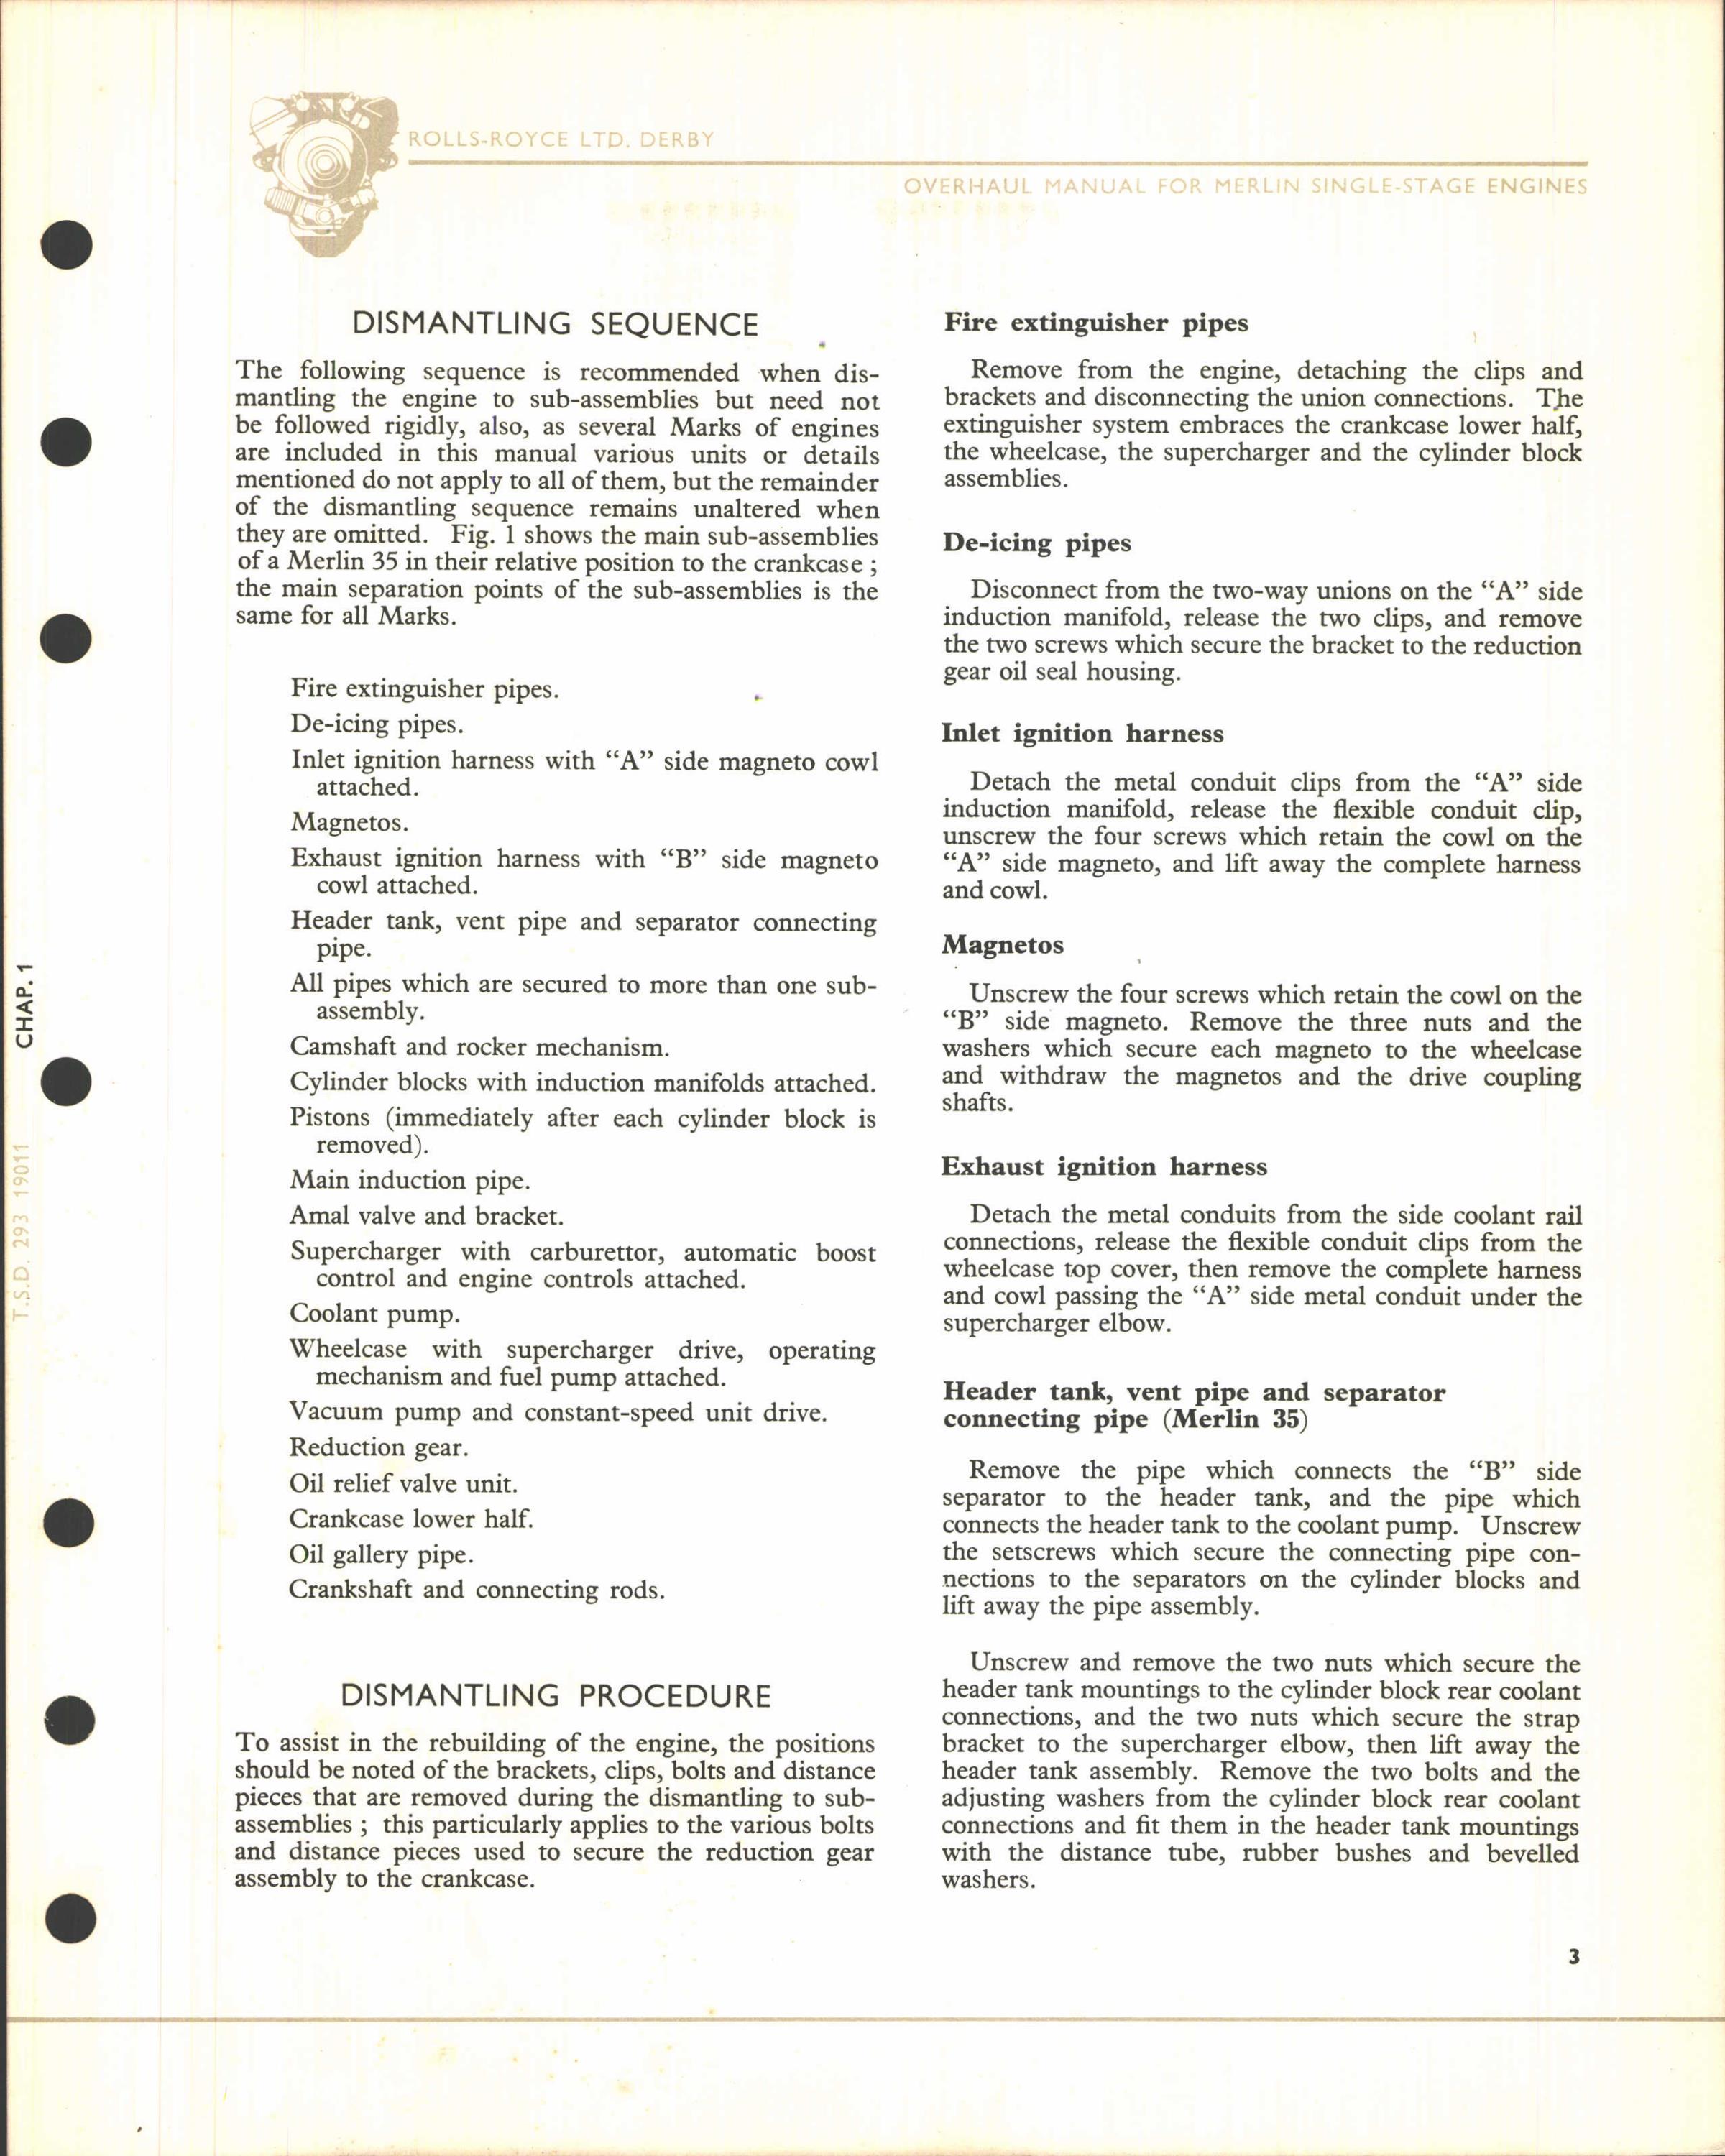 Sample page 19 from AirCorps Library document: Overhaul Manual for Rolls-Royce Single-Stage Merlin Engines